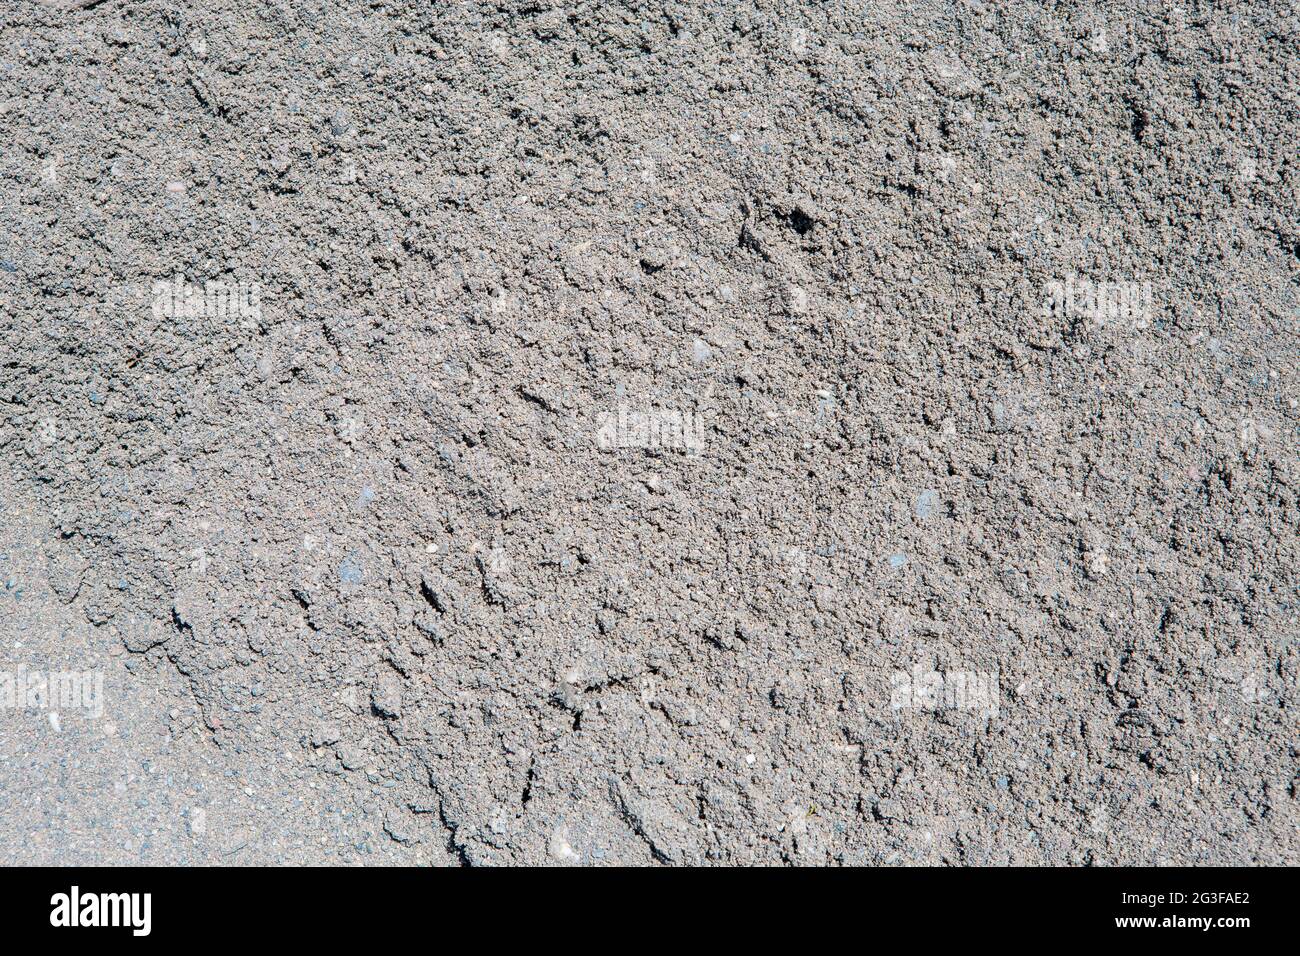 close-up shot of gray sand and pebbles ideal for use as background or texture Stock Photo